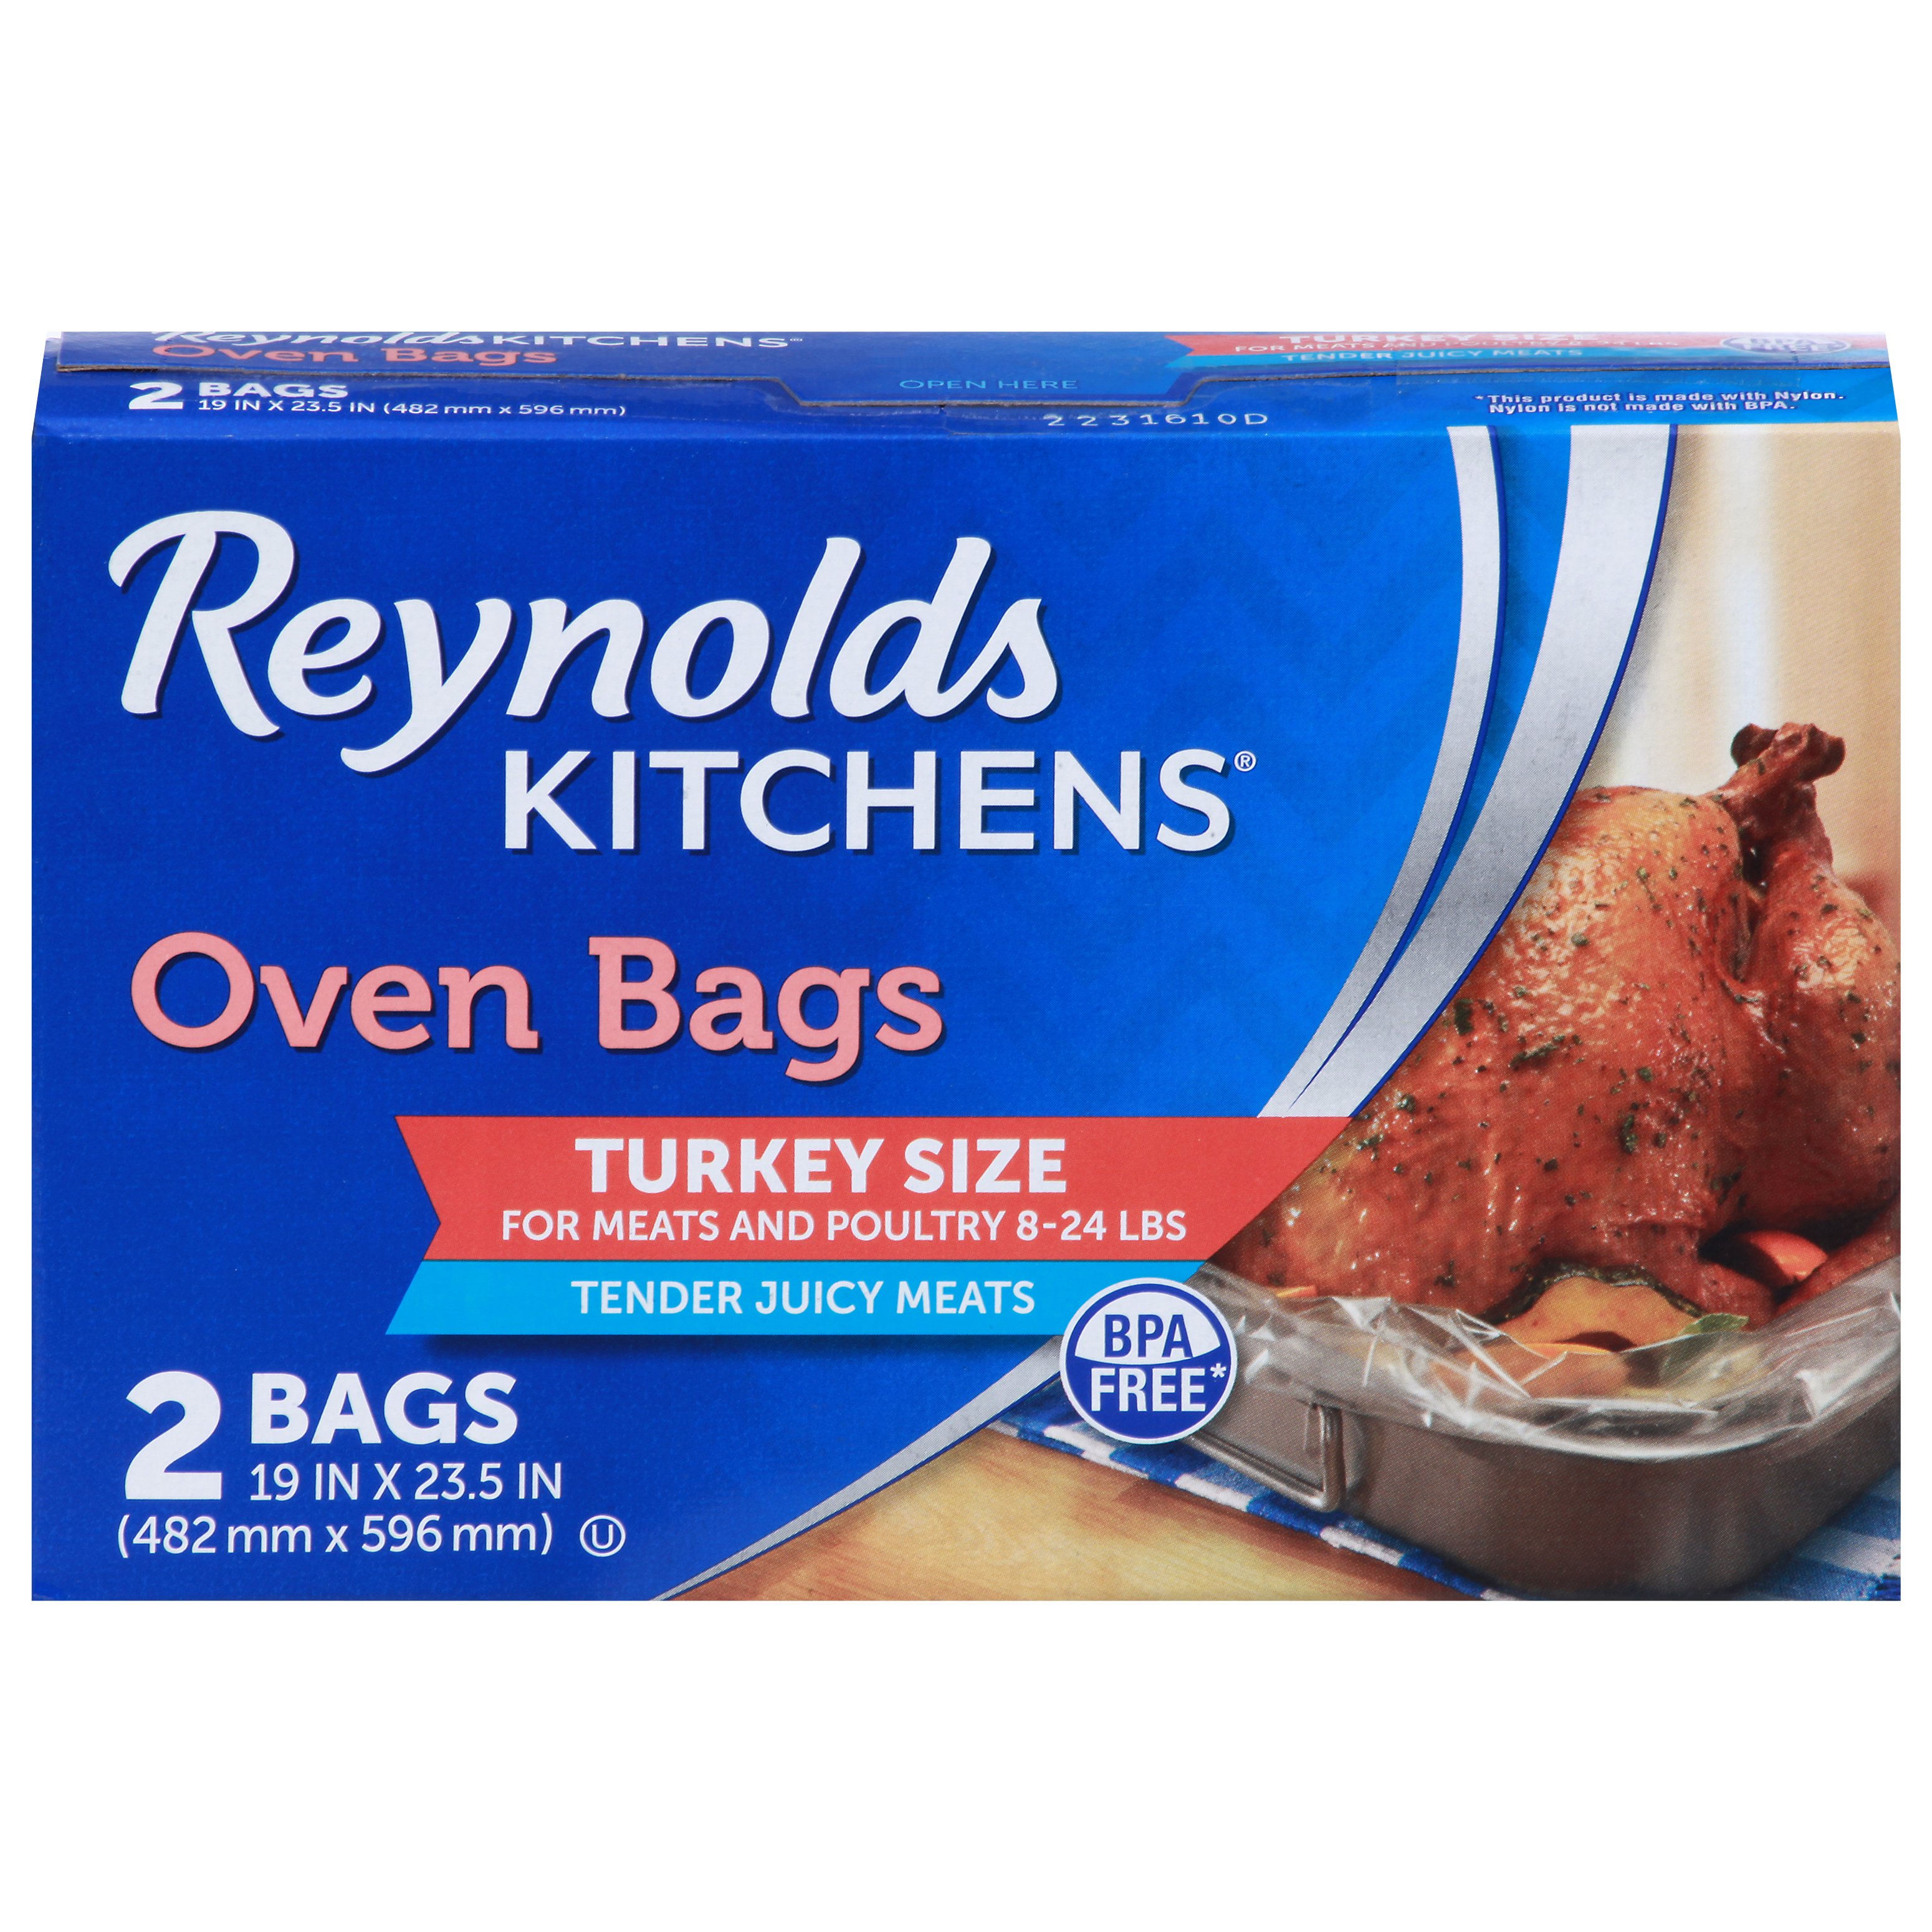 Reynolds Kitchens Turkey Size Oven Bags - Shop Storage Bags at H-E-B